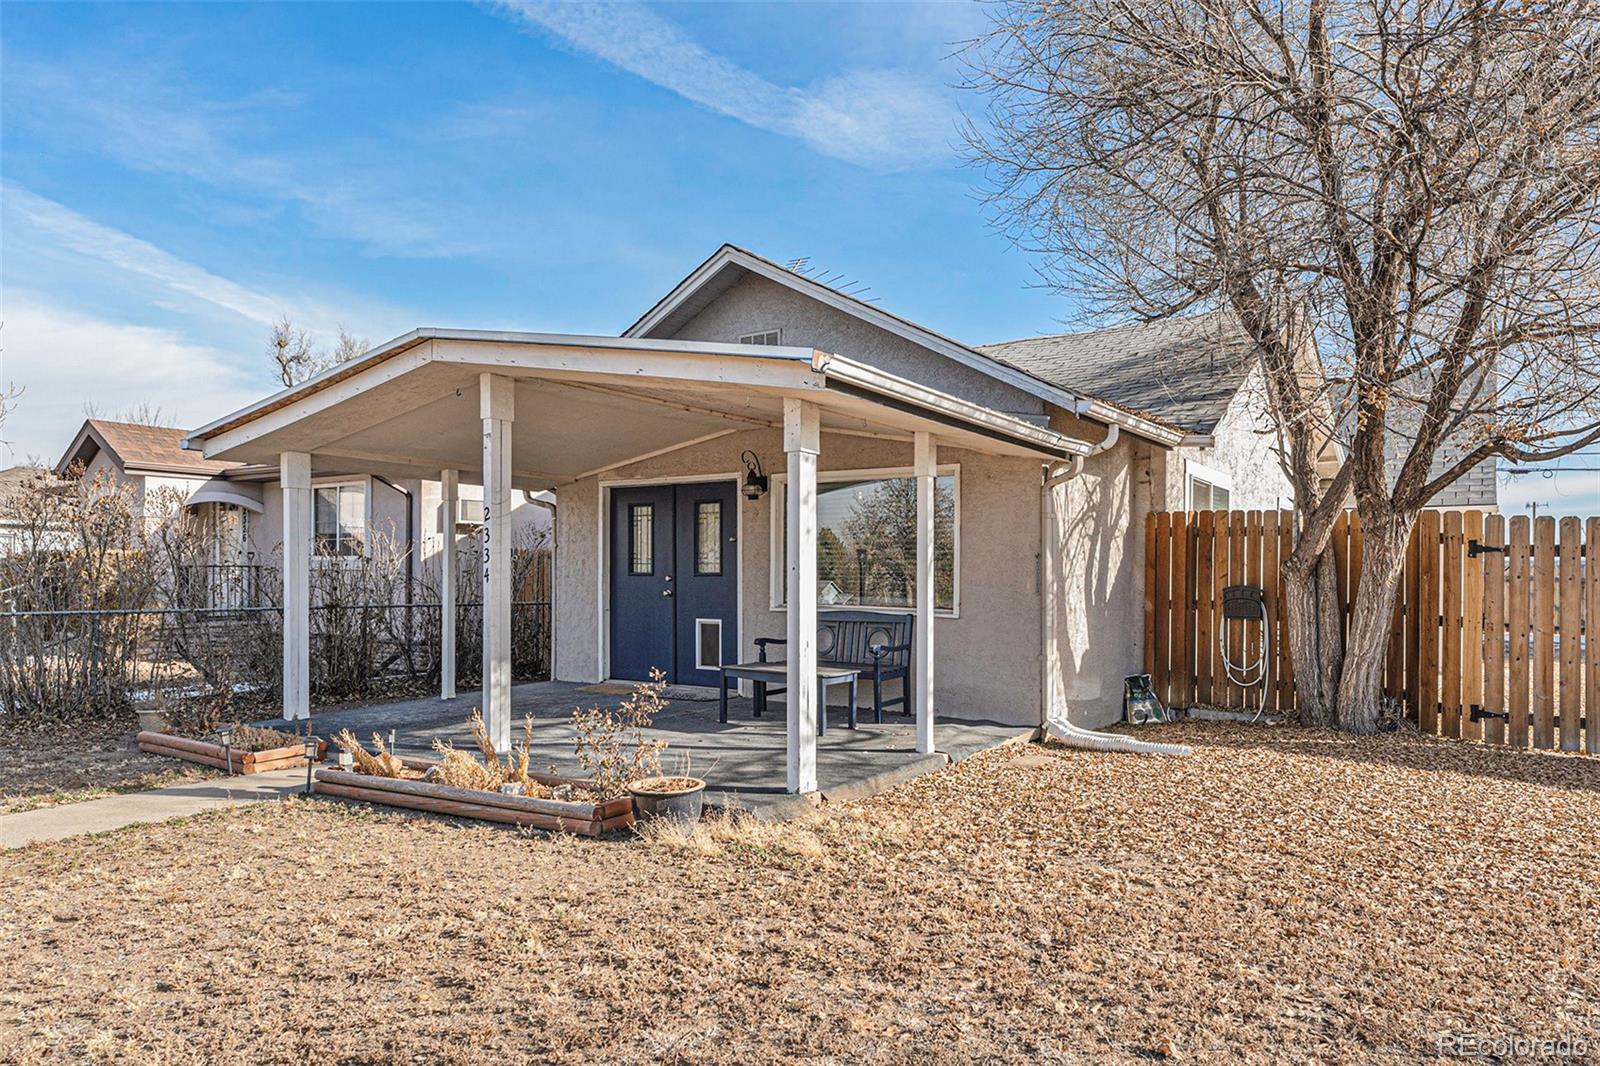 2334 s galapago street, denver sold home. Closed on 2024-03-21 for $435,000.